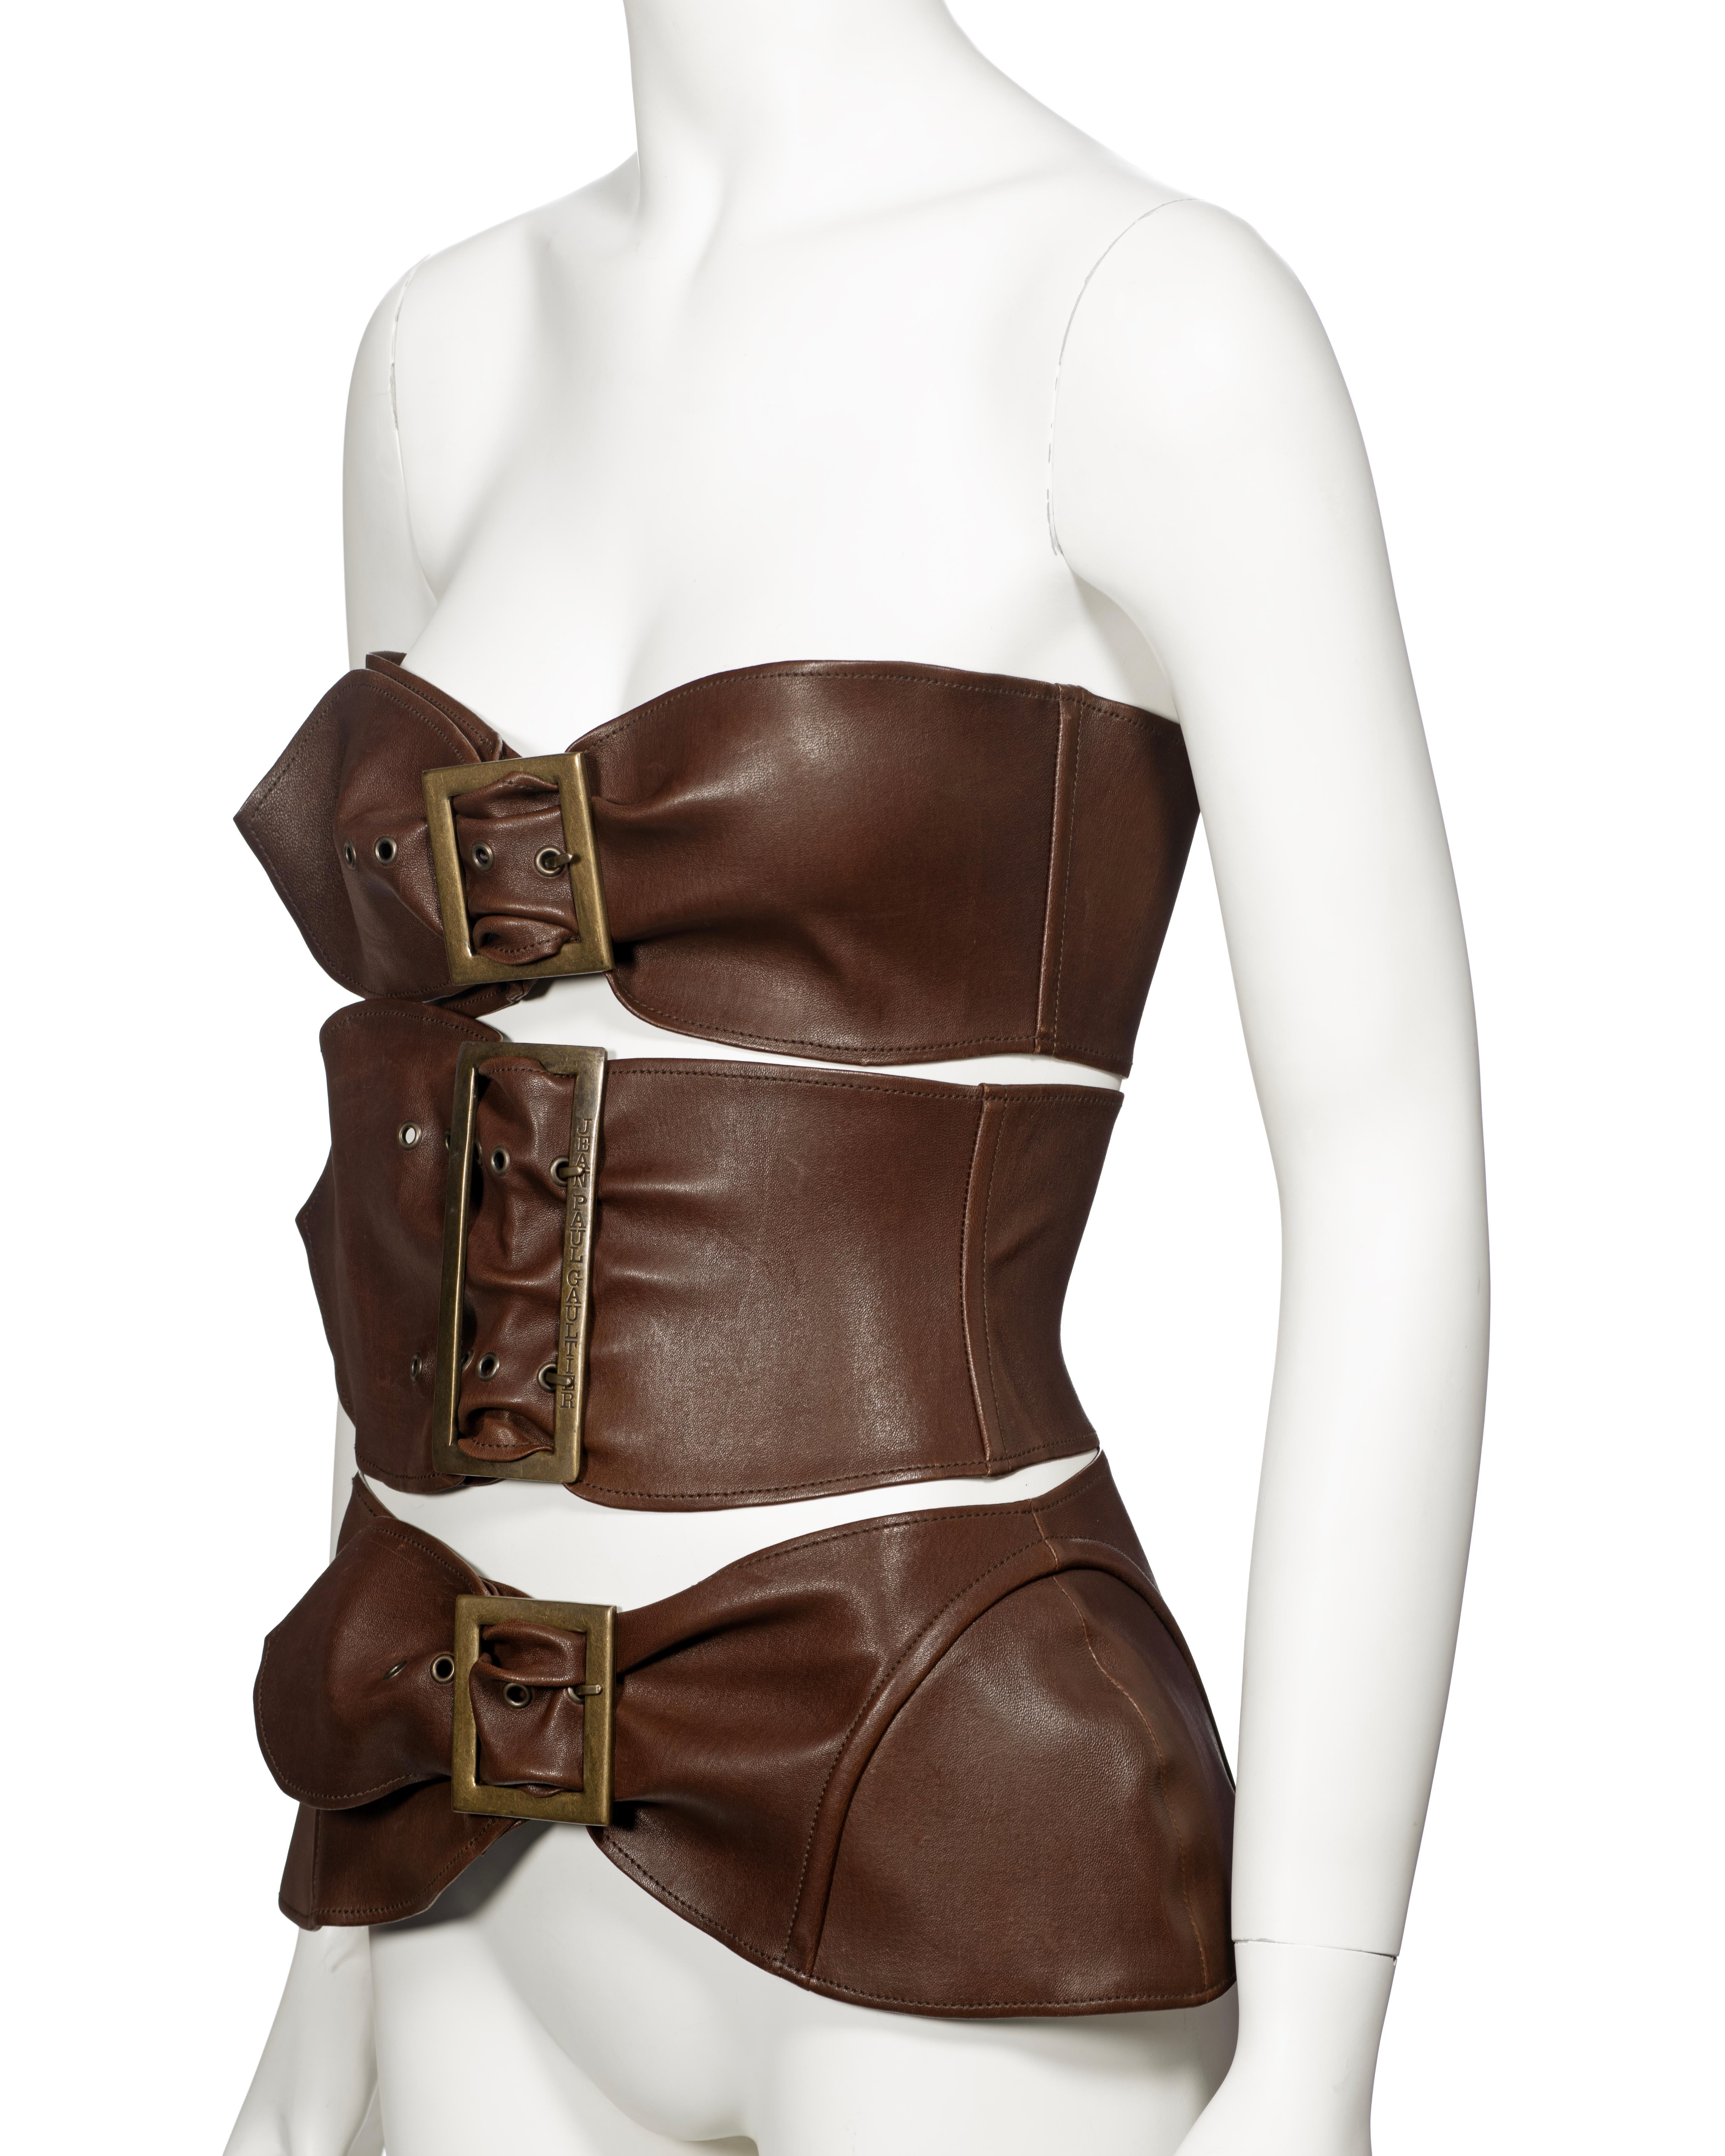 Women's Jean Paul Gaultier Brown Leather Corset Made From Three Belts, ss 2008